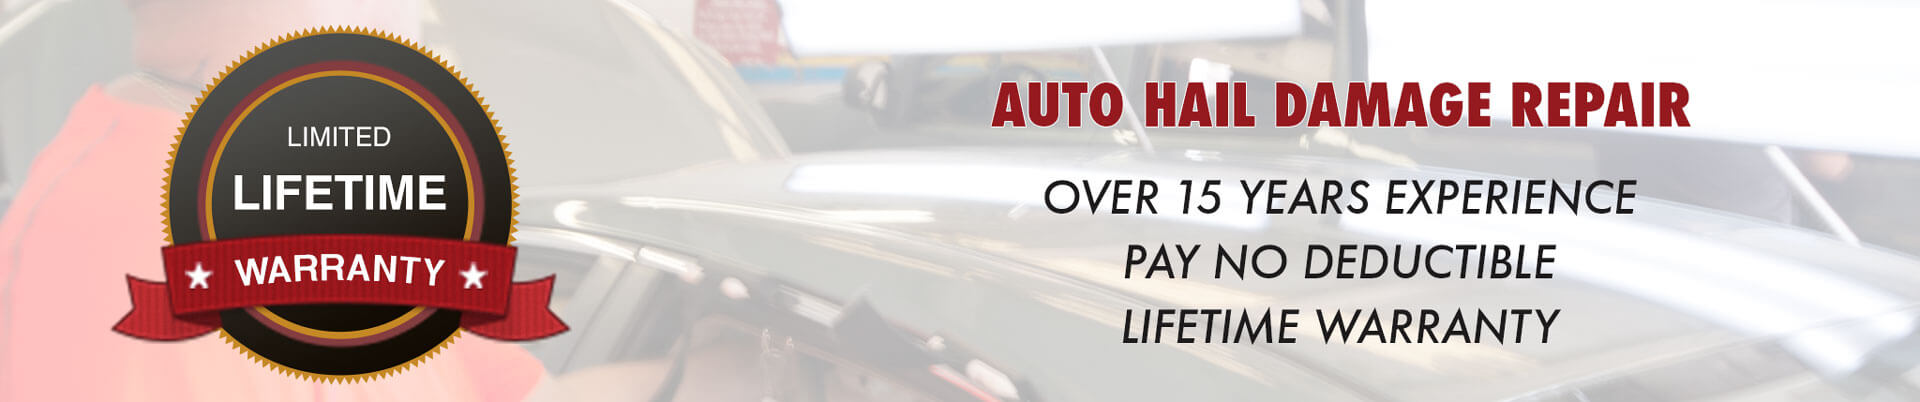 Limited Lifetime Warranty on Auto Hail Damage Repair at Auto Dent Specialists